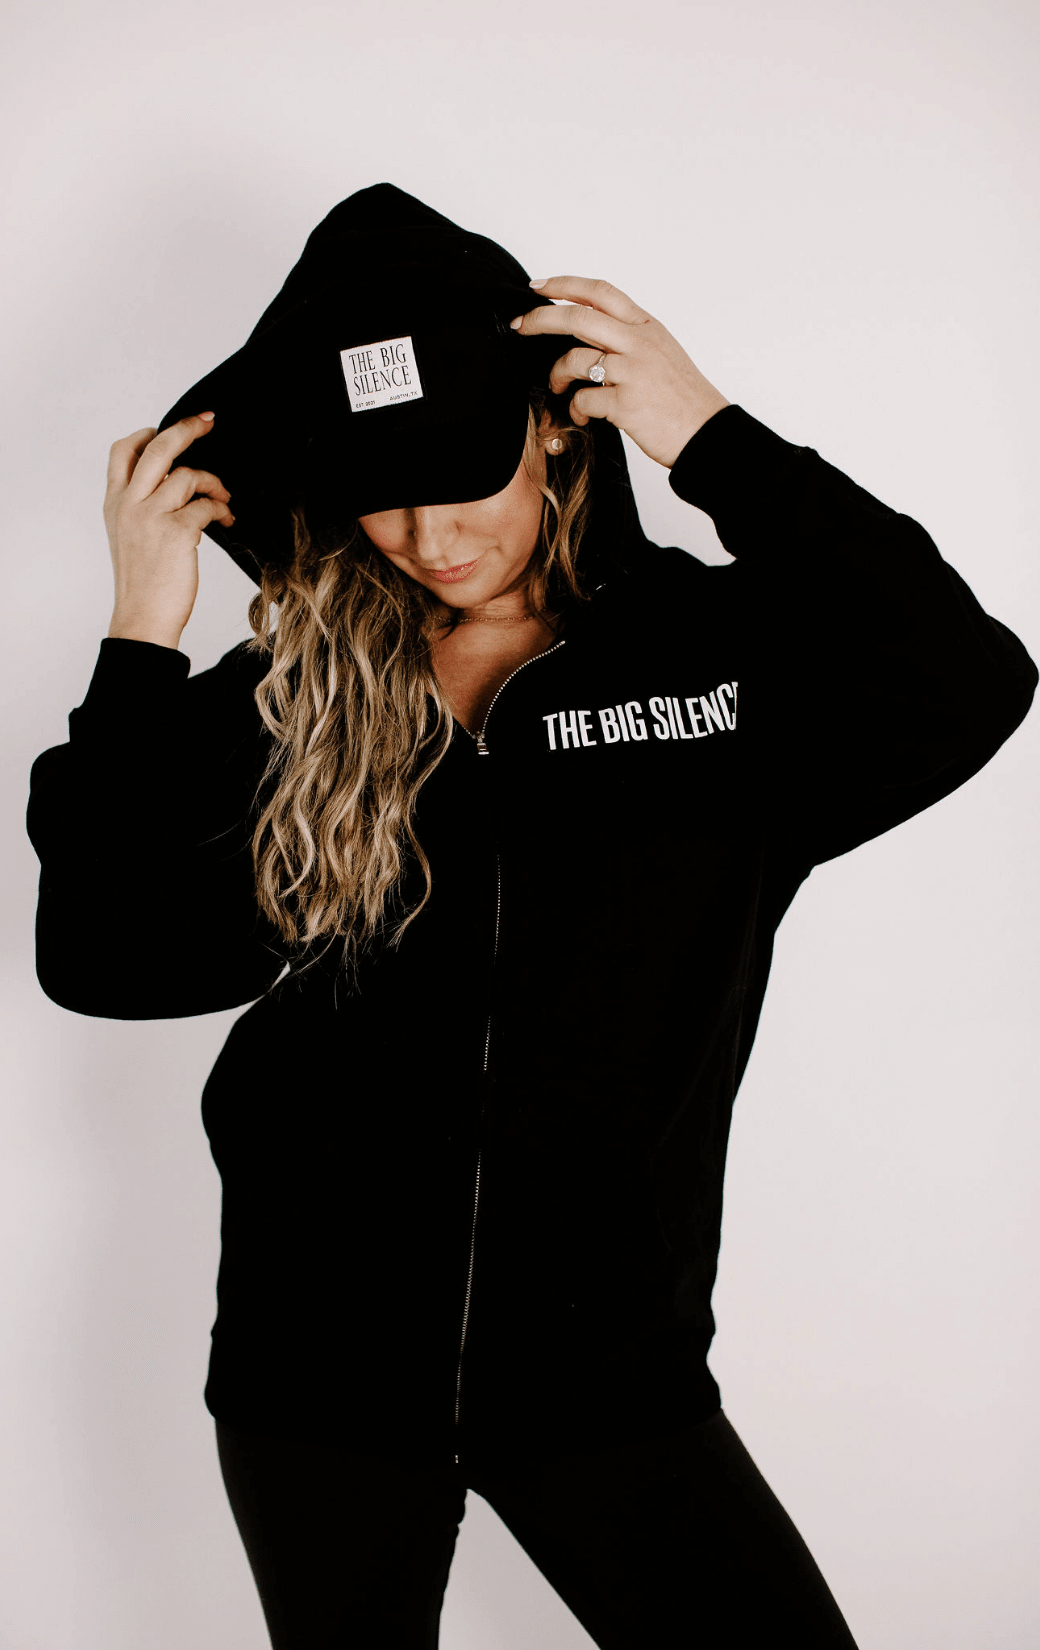 Karena in TBS hoodie with trucker hat and jeans